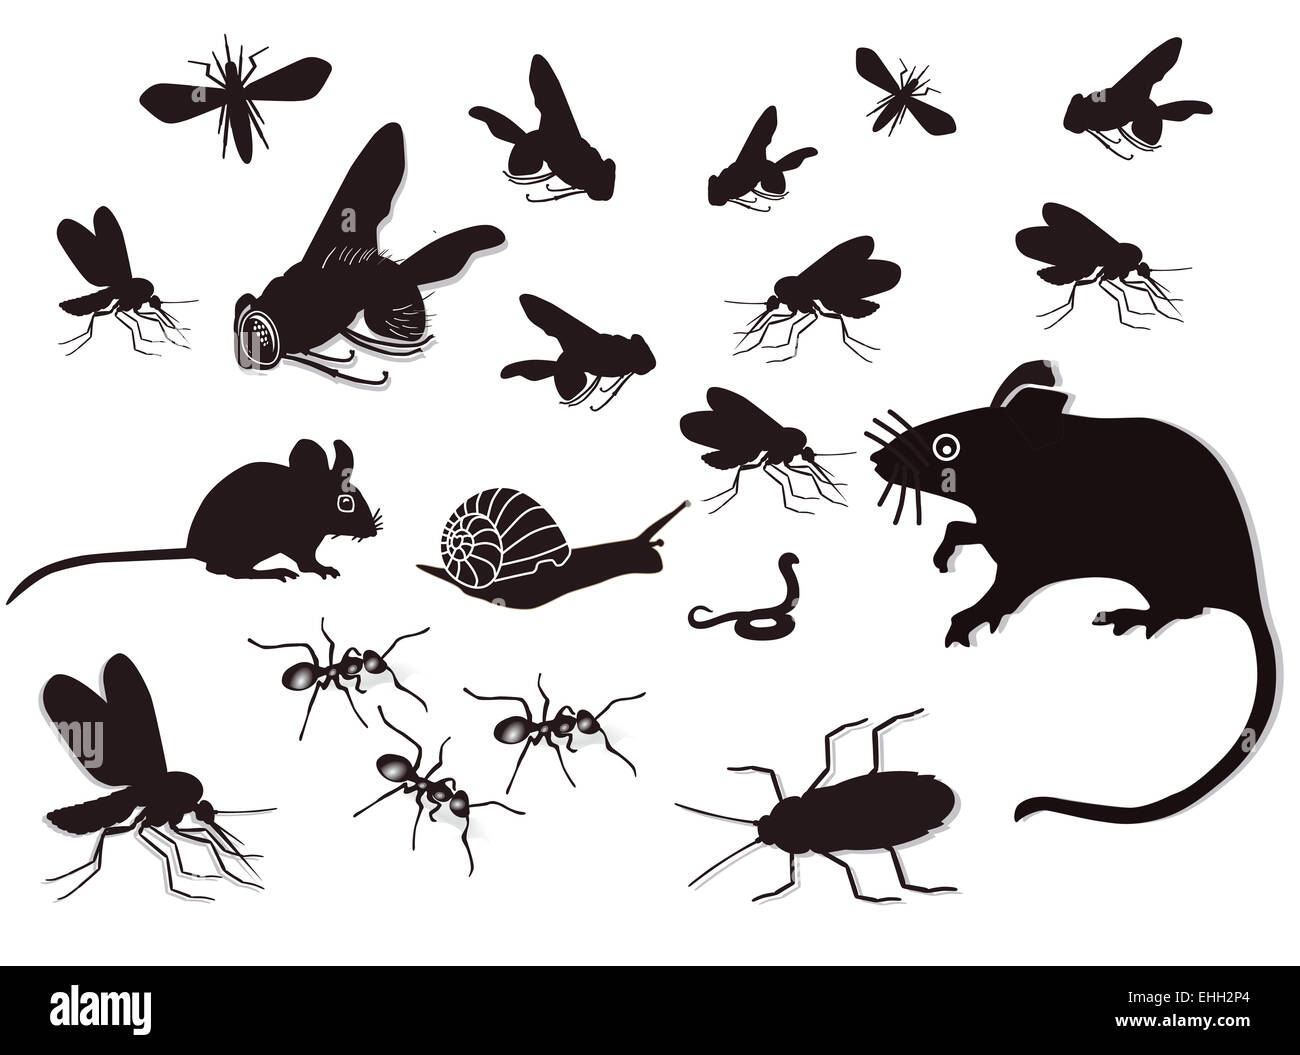 Pests and vermin Stock Photo